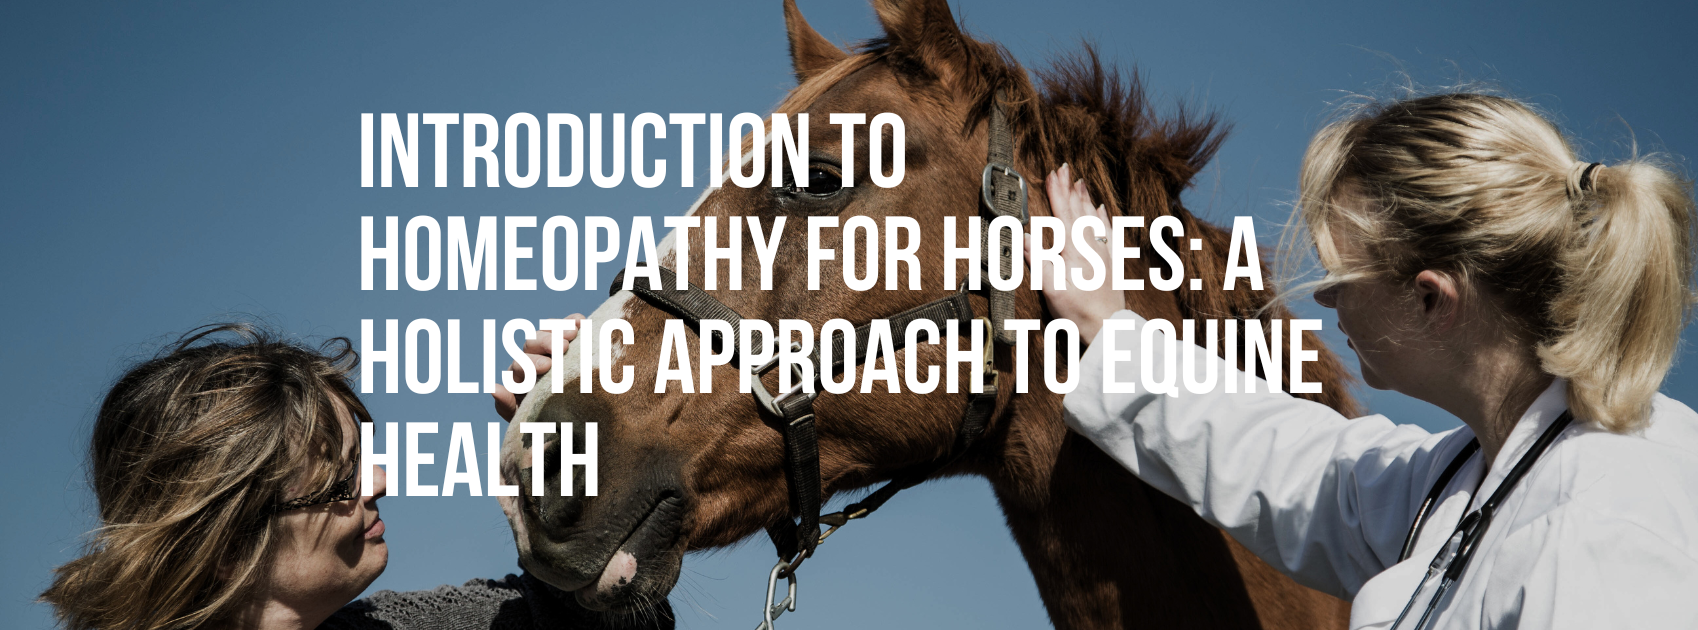 Introduction to Homeopathy for Horses: A Holistic Approach to Equine Health